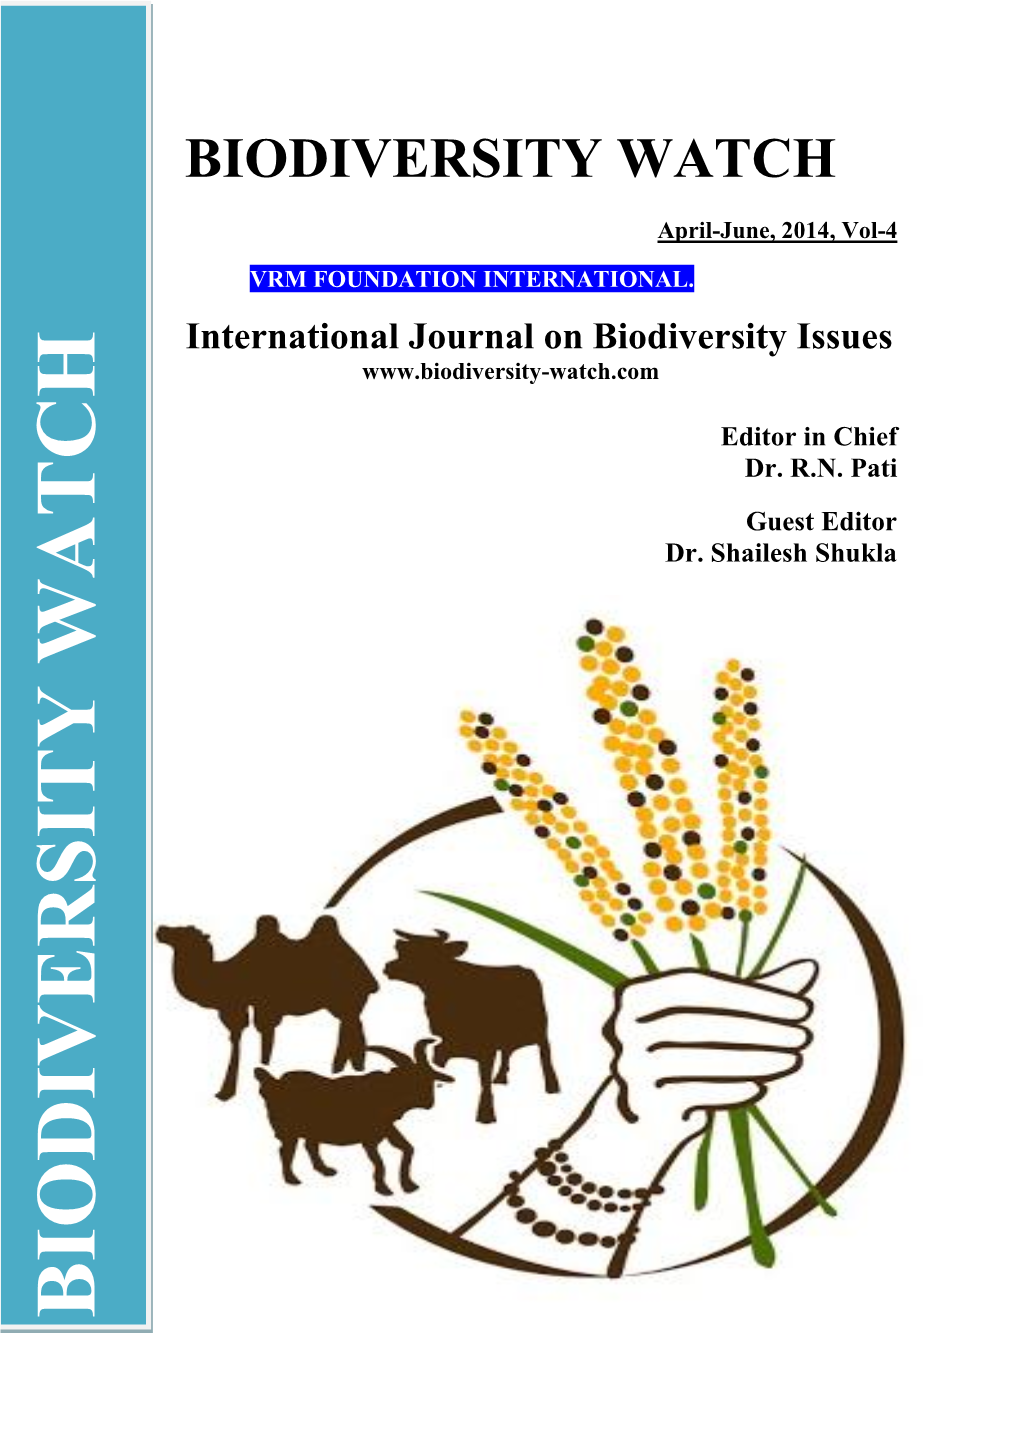 Changing Food Habits, Their Causal Factors, and the Value of Dietary Diversity in Jumla, Nepal